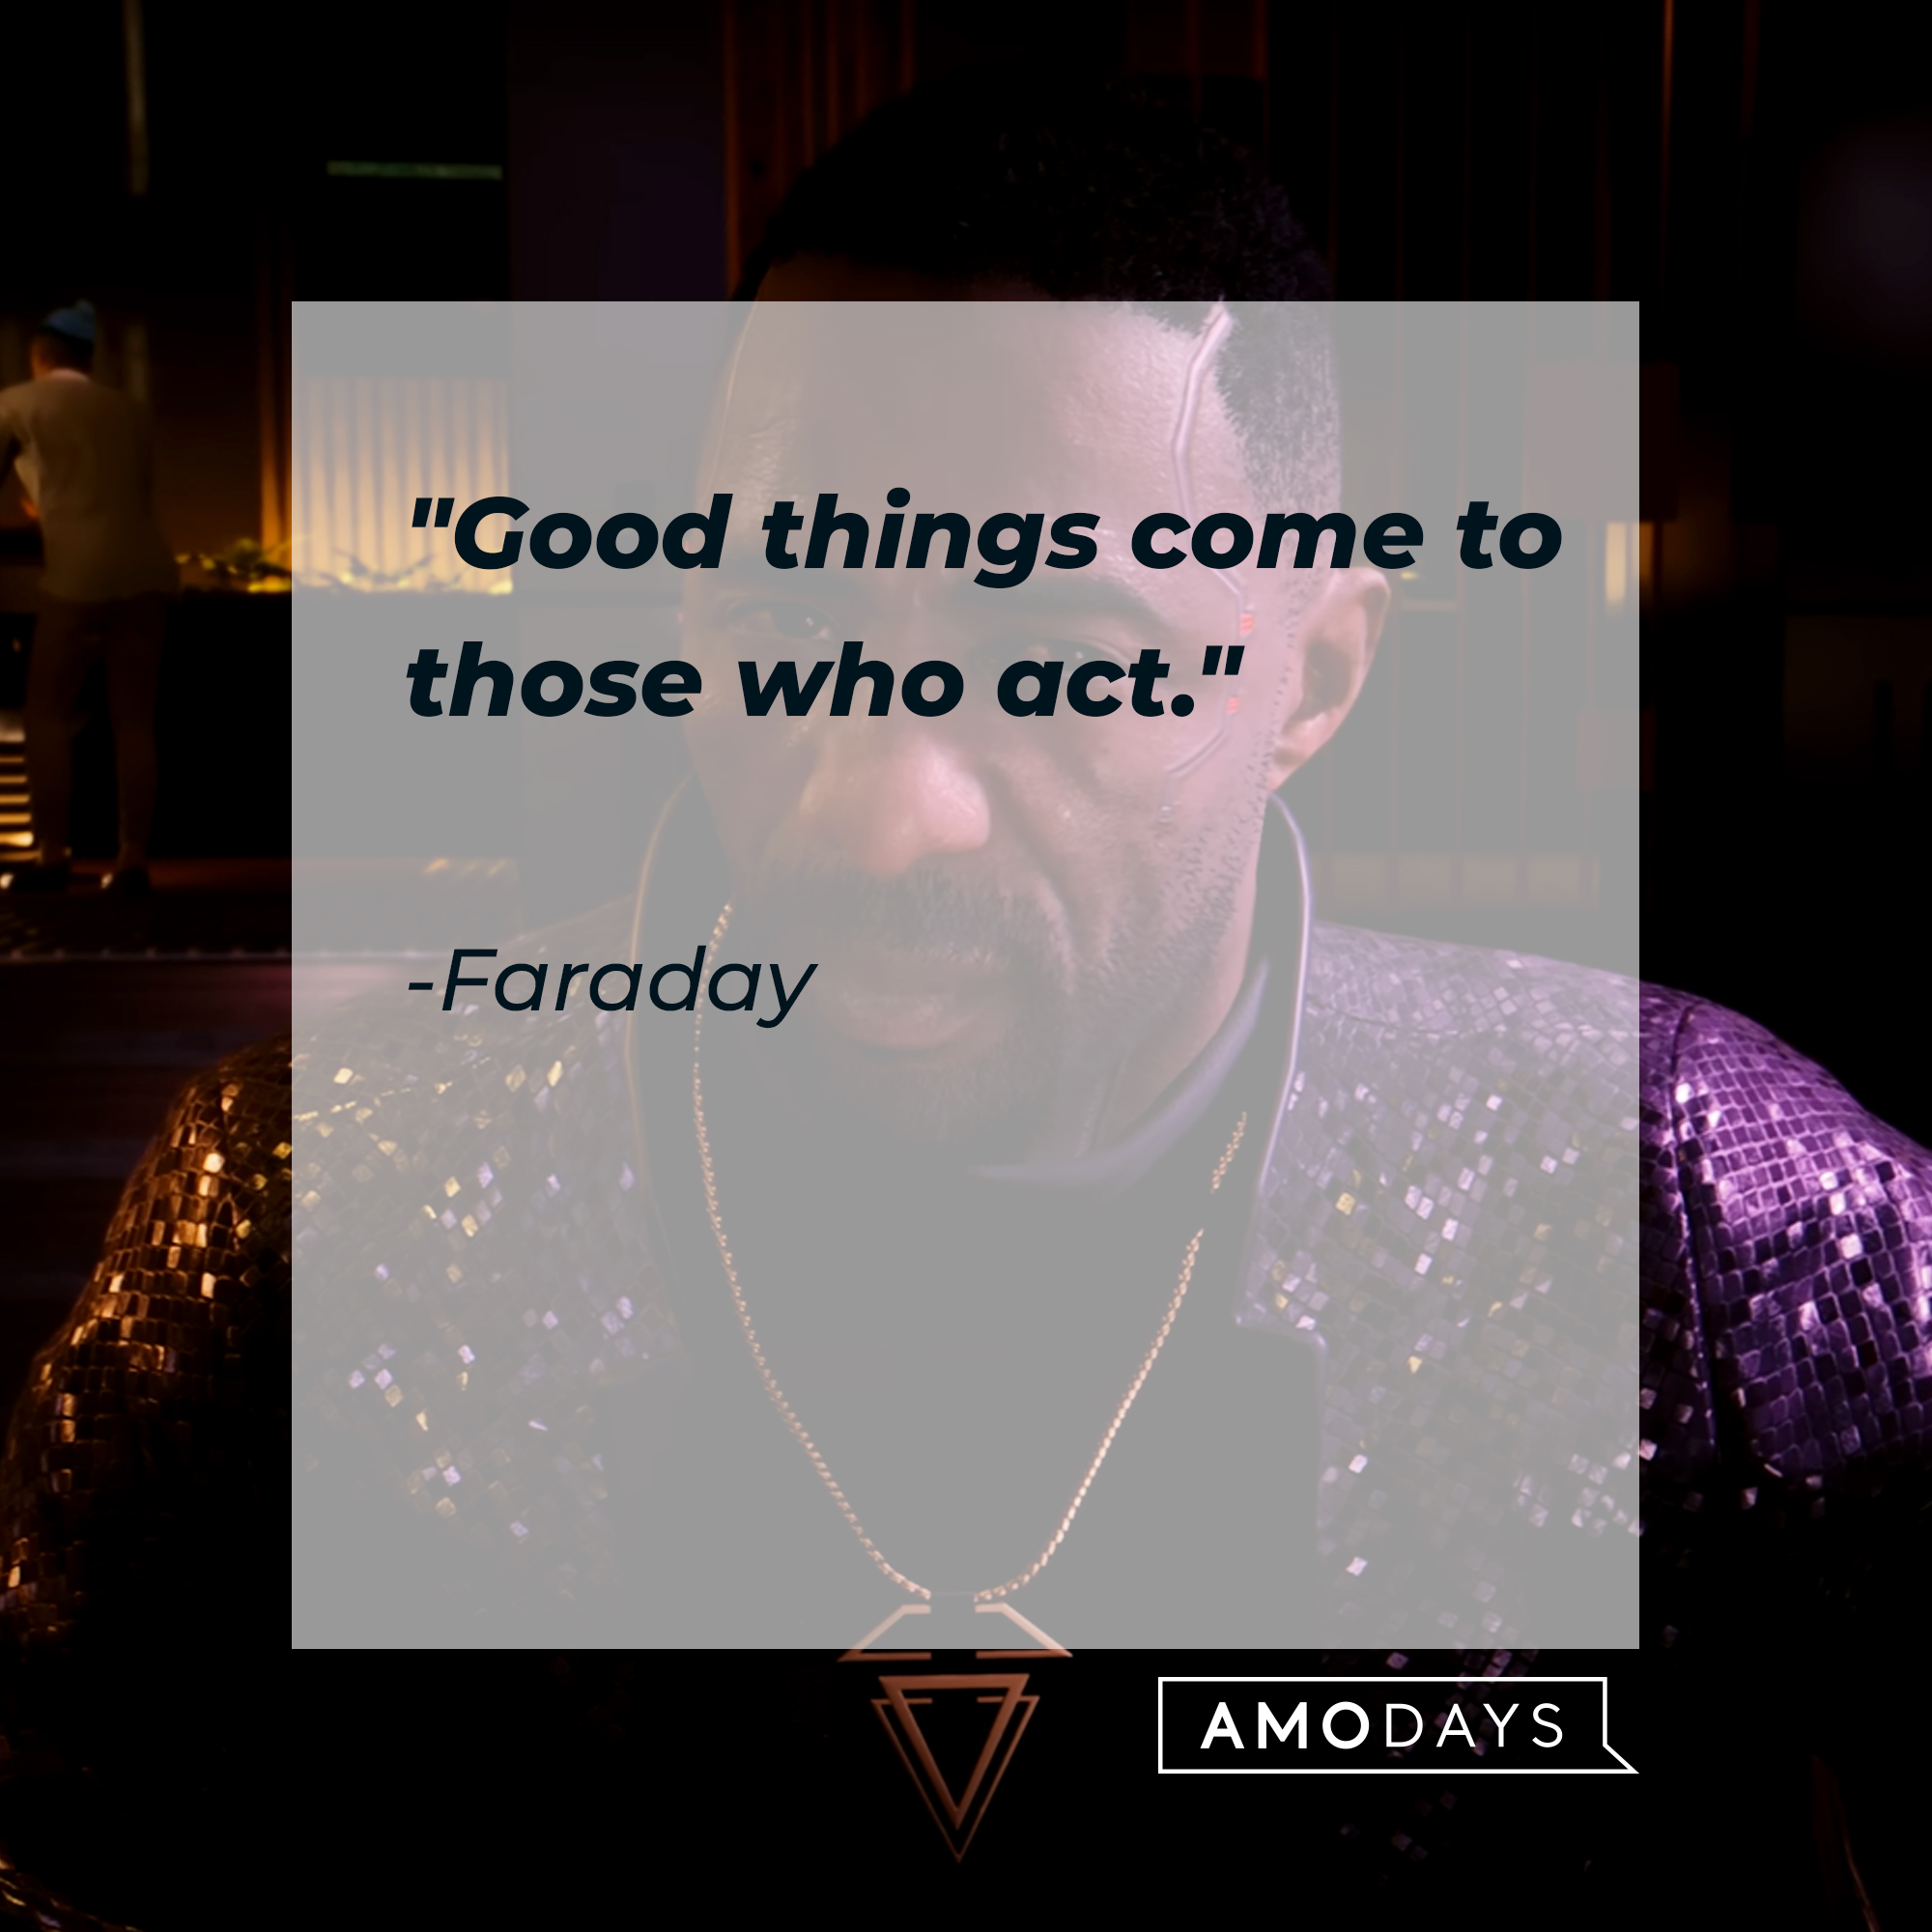 Faraday’s quote: "Good things come to those who act." | Source: Youtube.com/CyberpunkGame